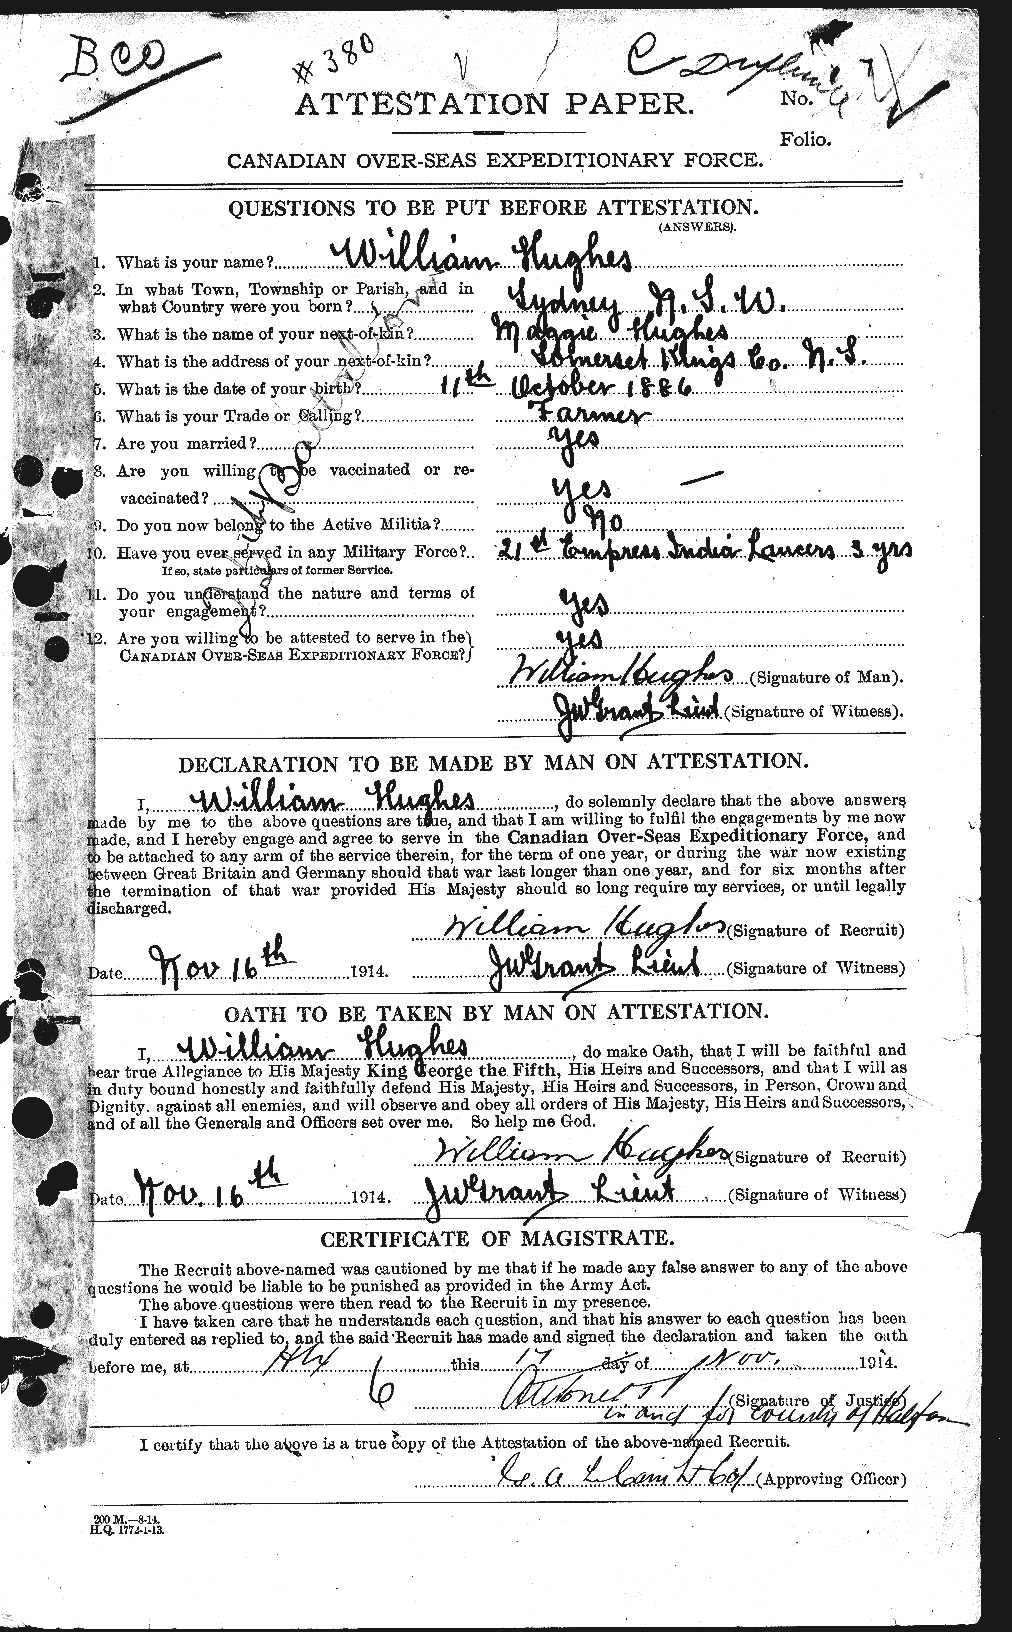 Personnel Records of the First World War - CEF 405879a